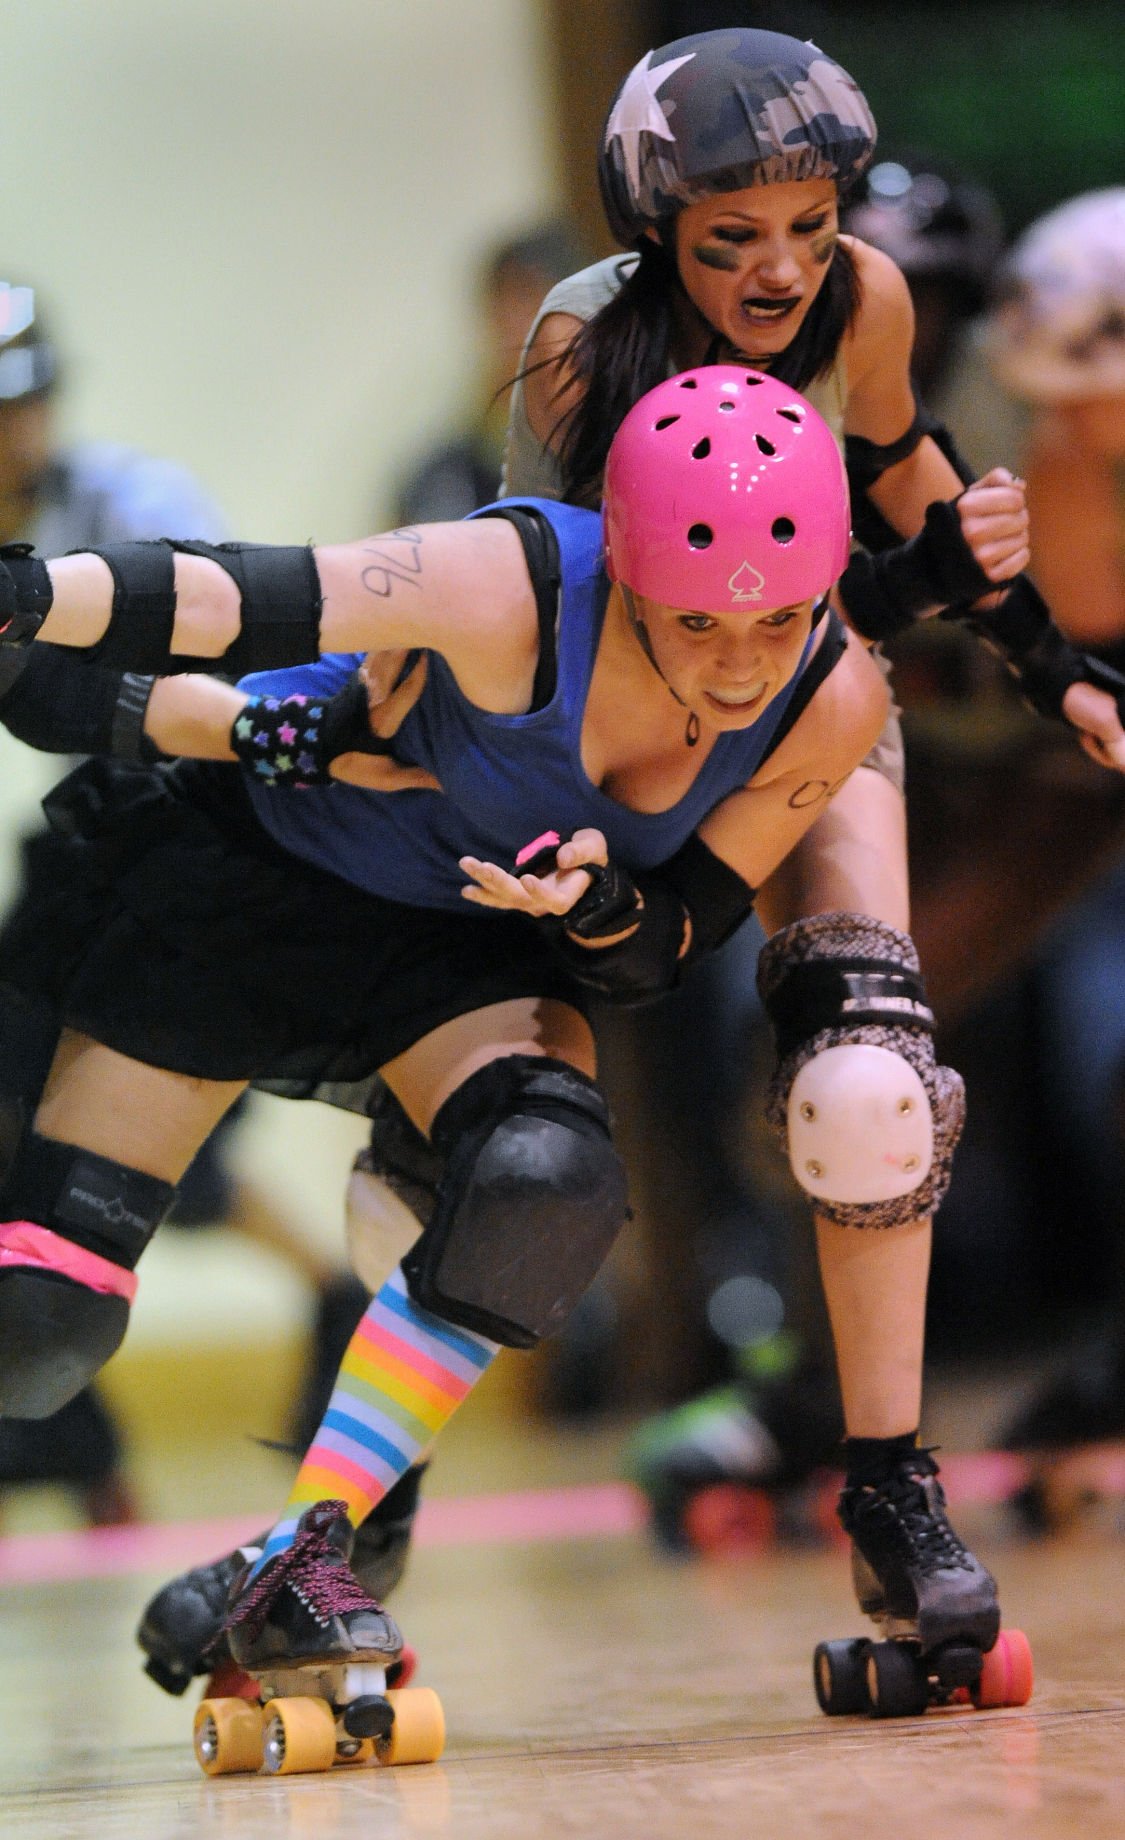 Roller derby resurgence: How America's forgotten pastime remains